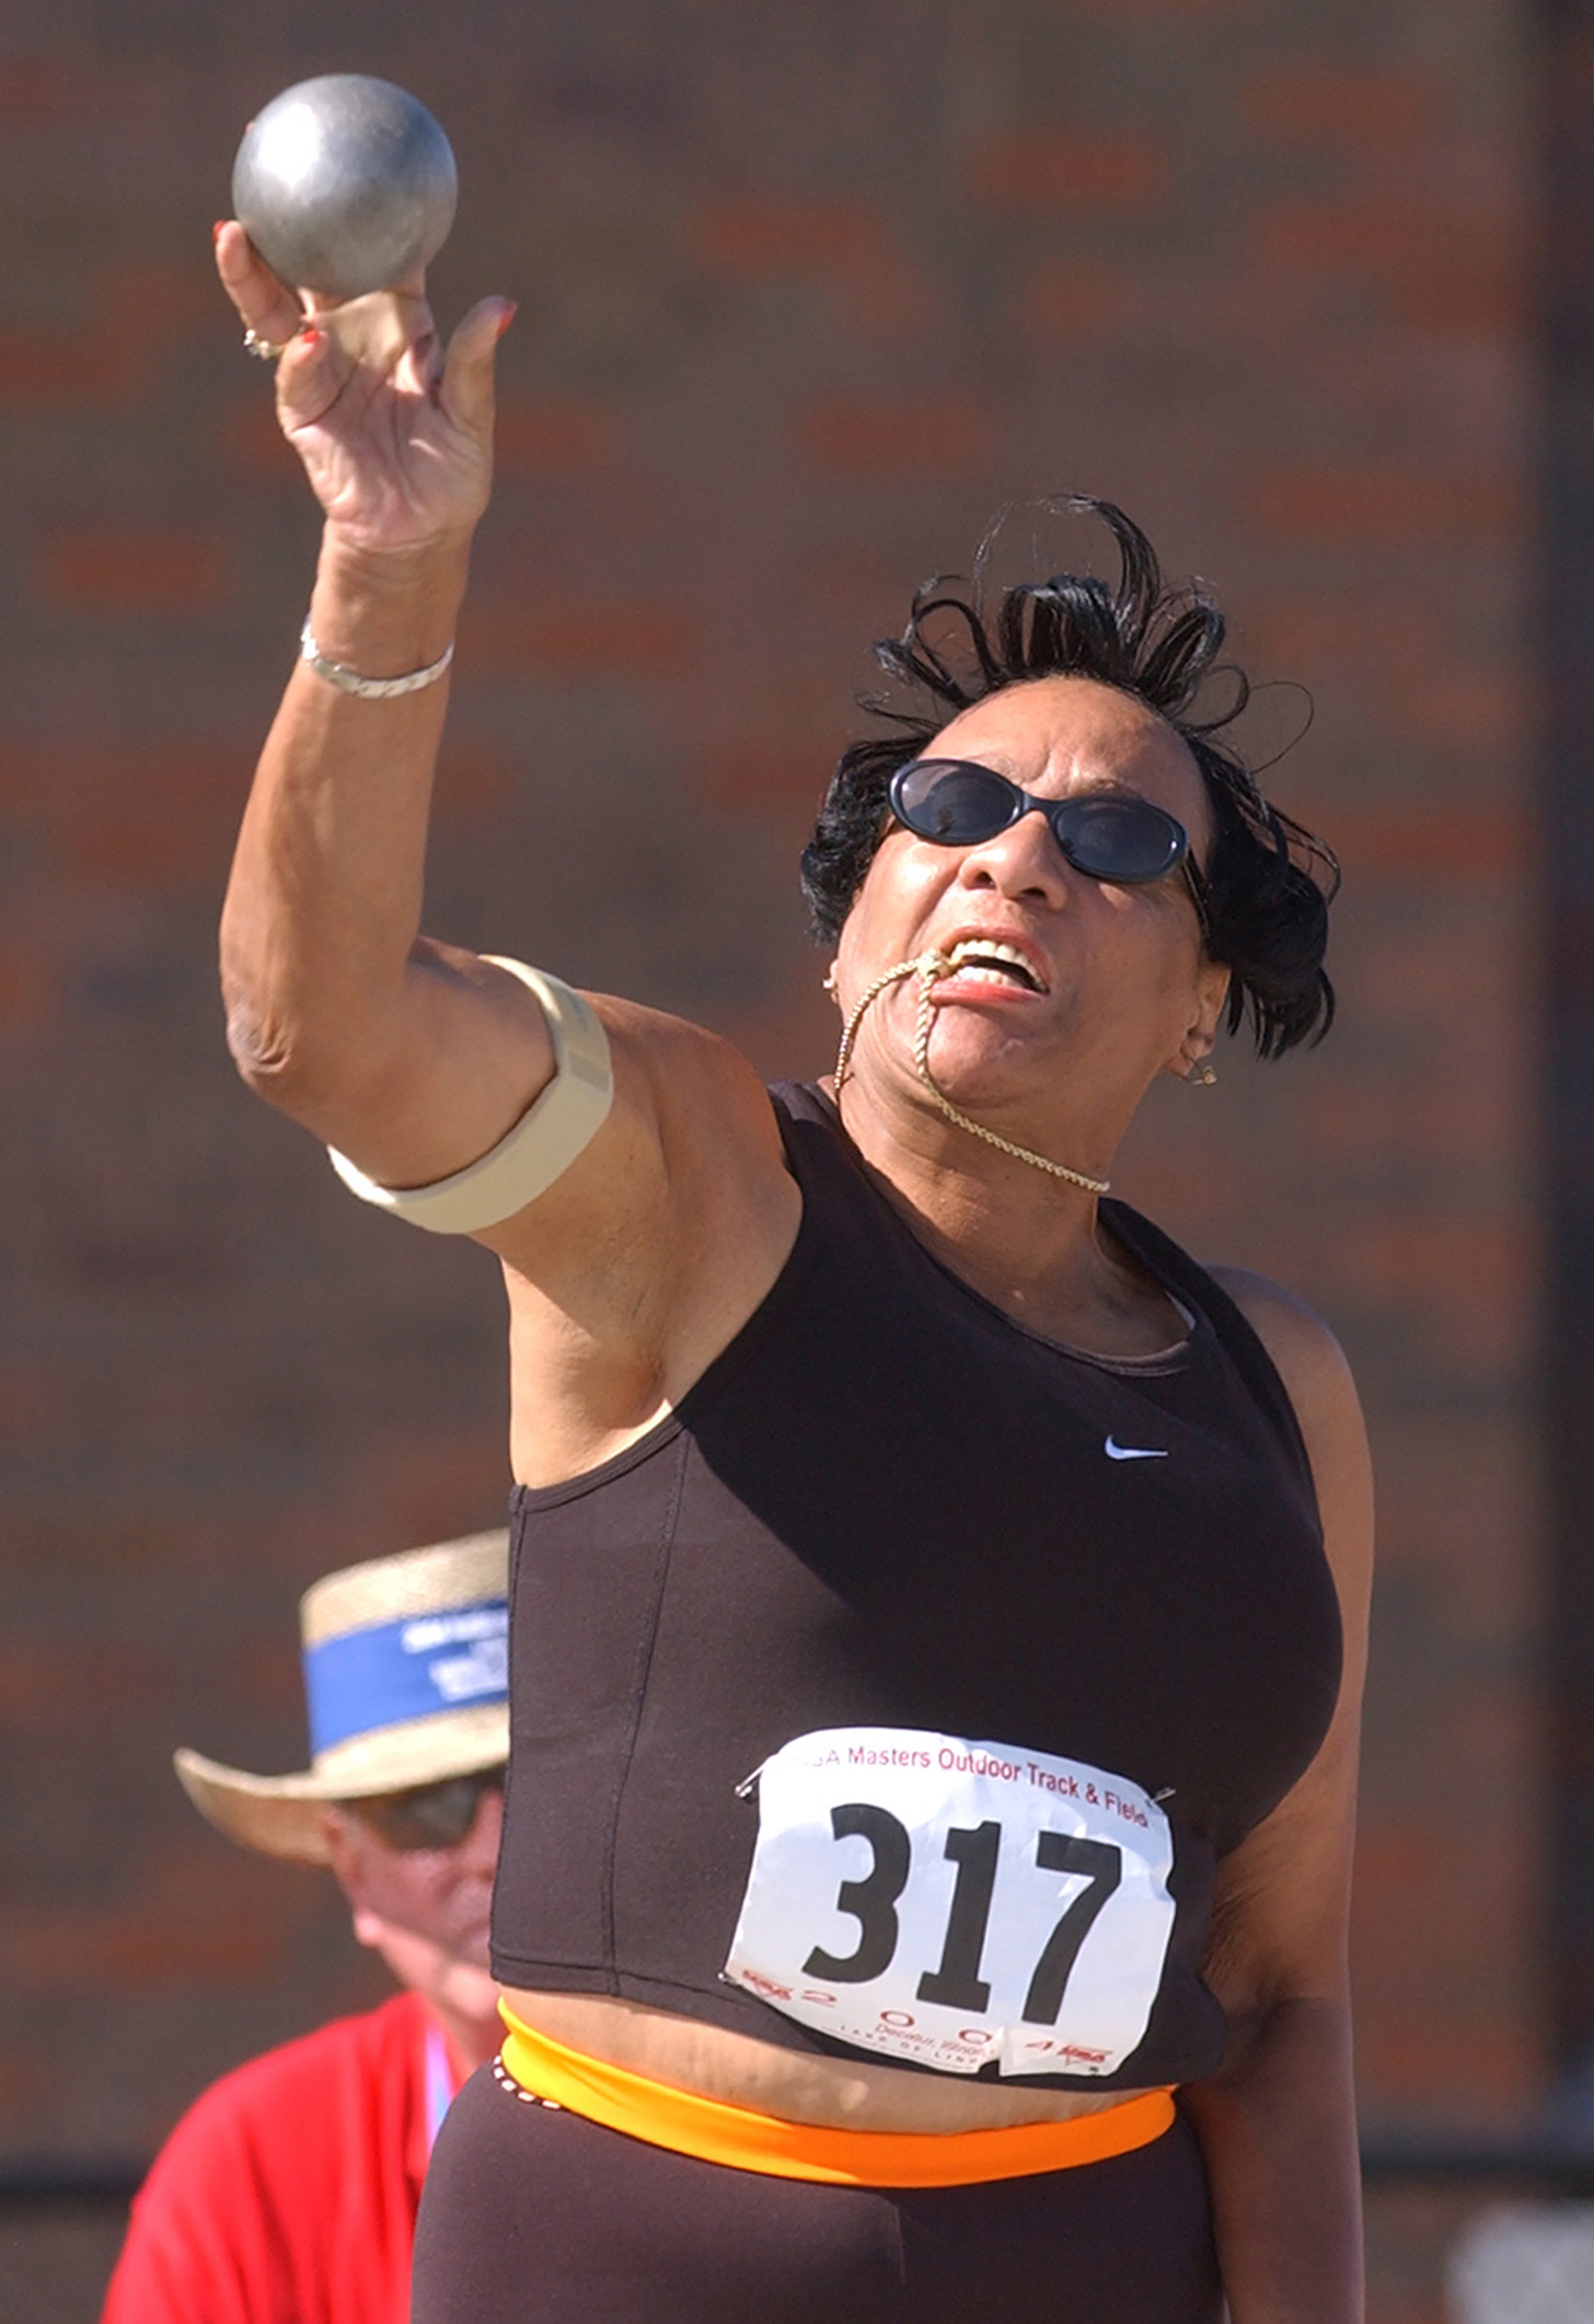 Mary Roman, of Norwalk, CT makes a shot put attempt on Aug. 5, 2004, at the USA Masters Outdoor Track &amp; Field competition in Decatur, Ill.